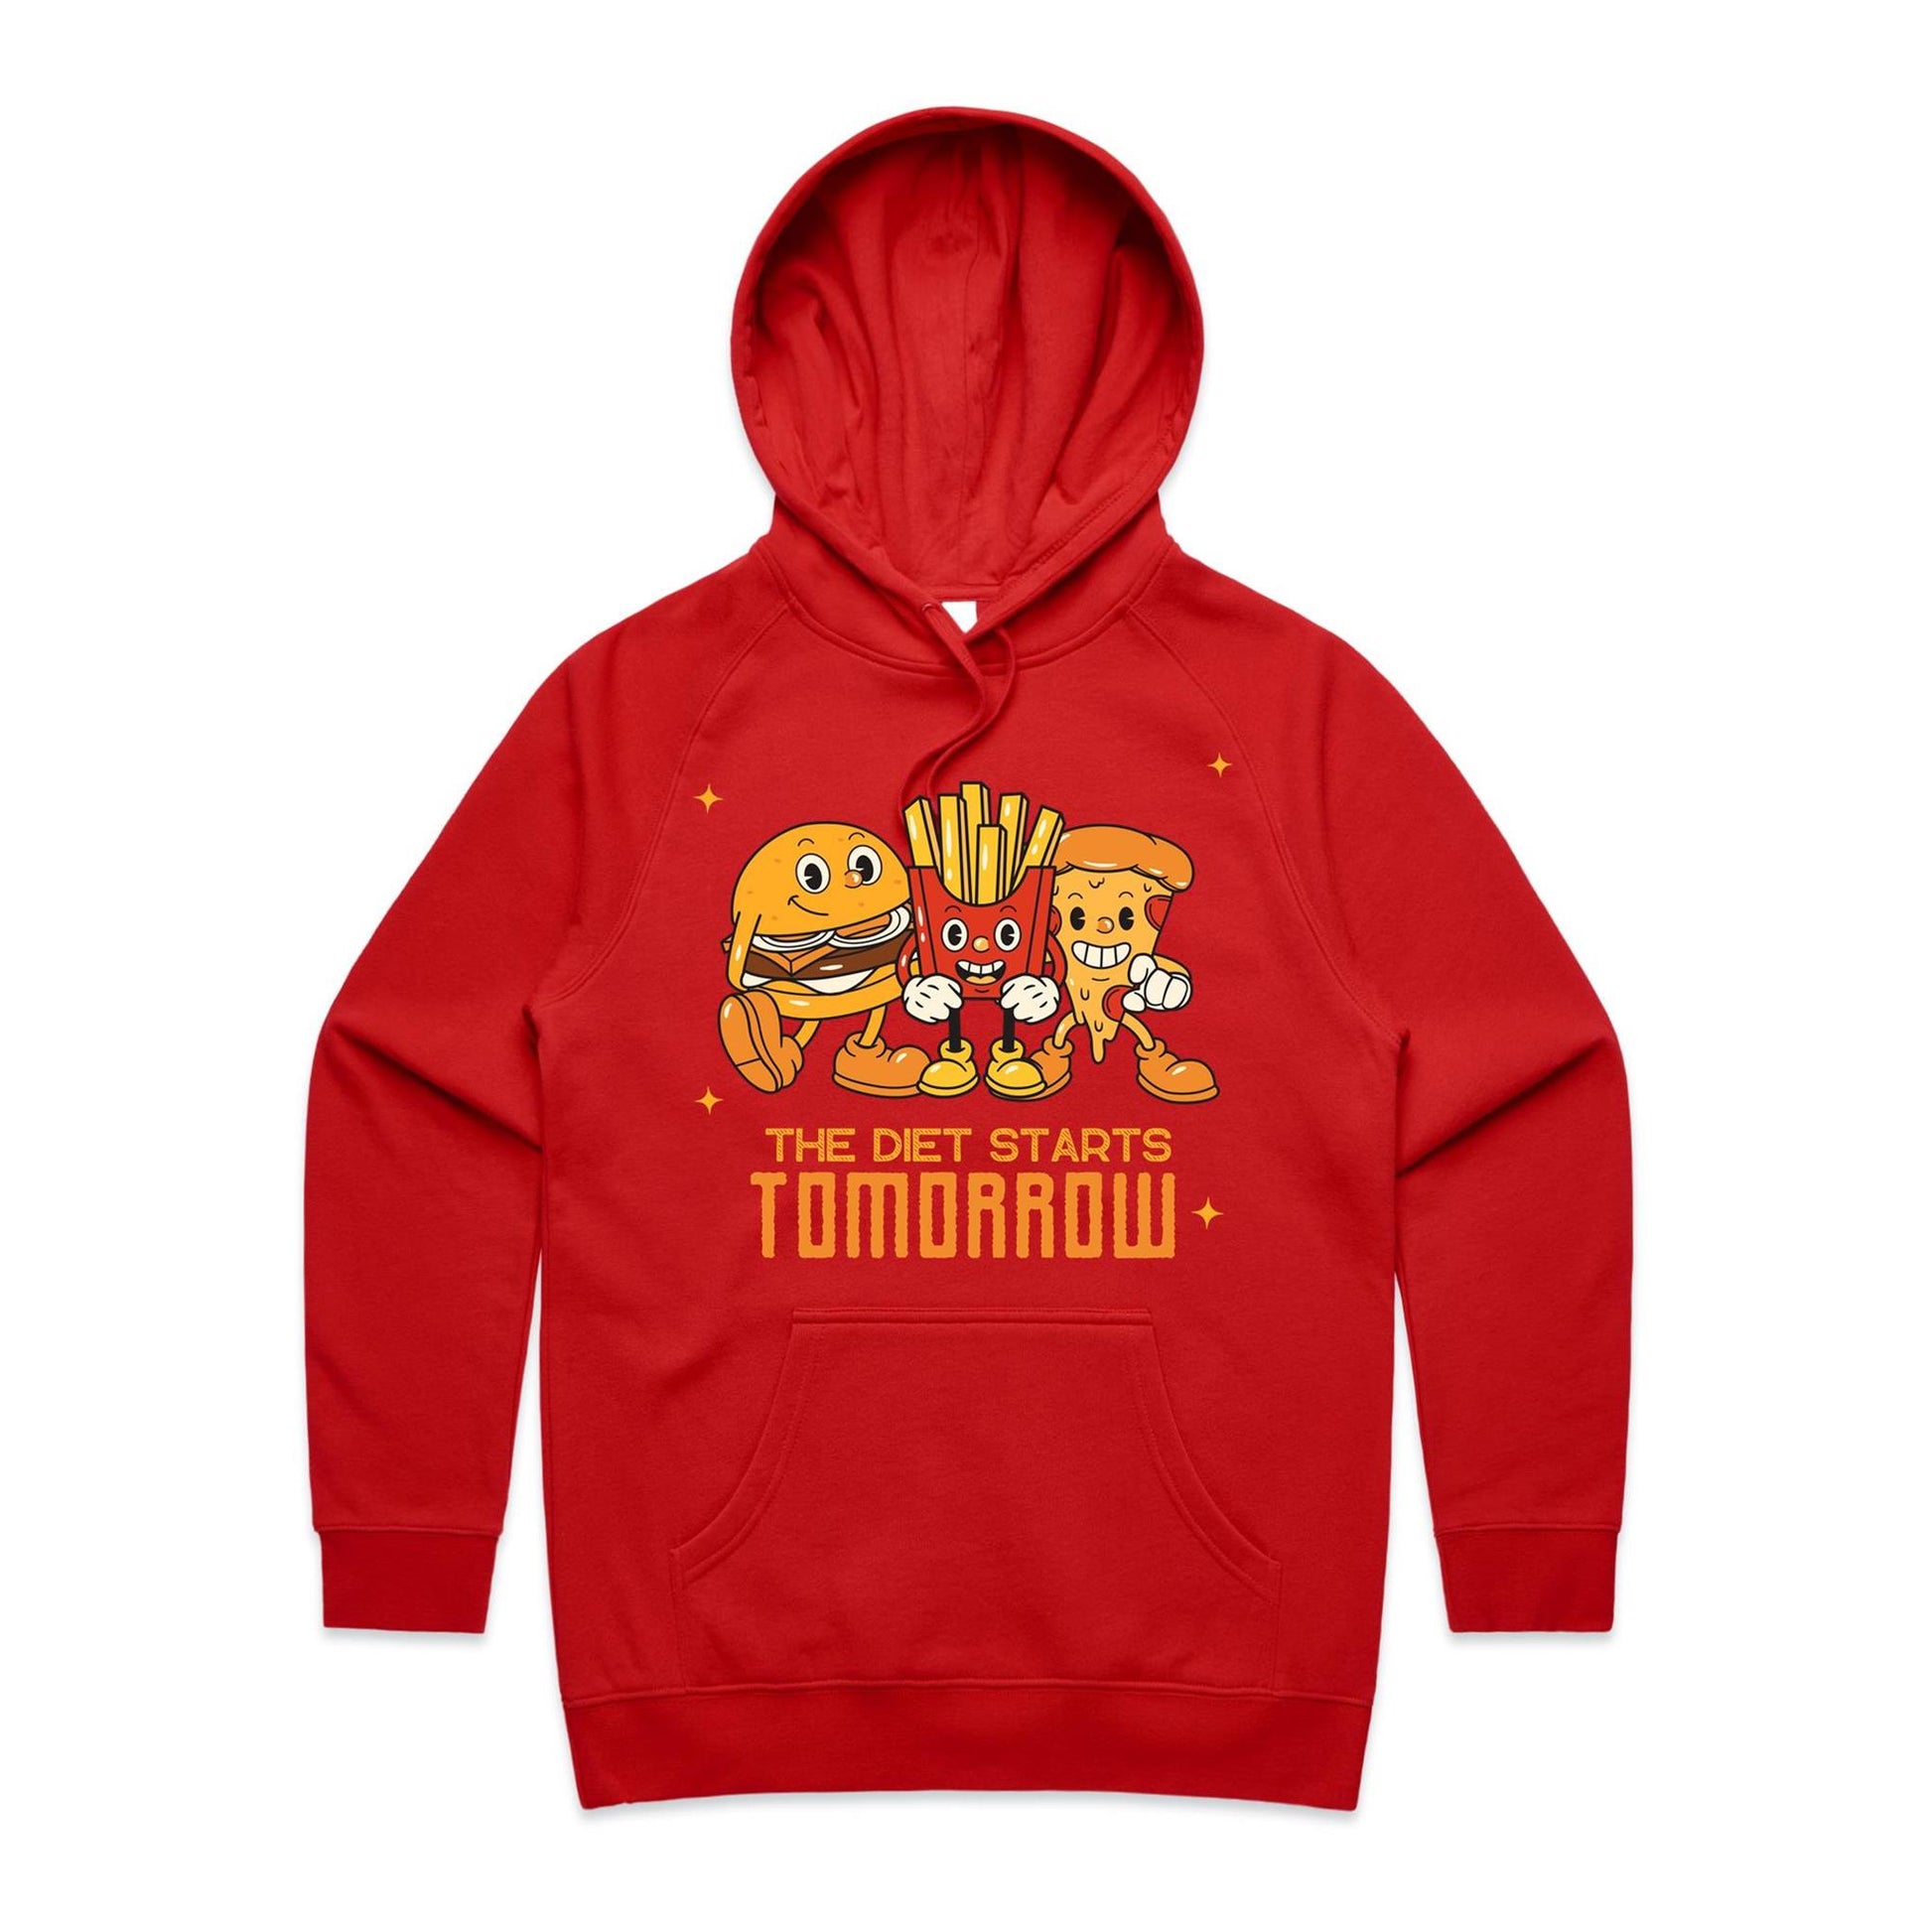 The Diet Starts Tomorrow, Hamburger, Pizza, Fries - Women's Supply Hood Red Womens Supply Hoodie Food Funny Retro